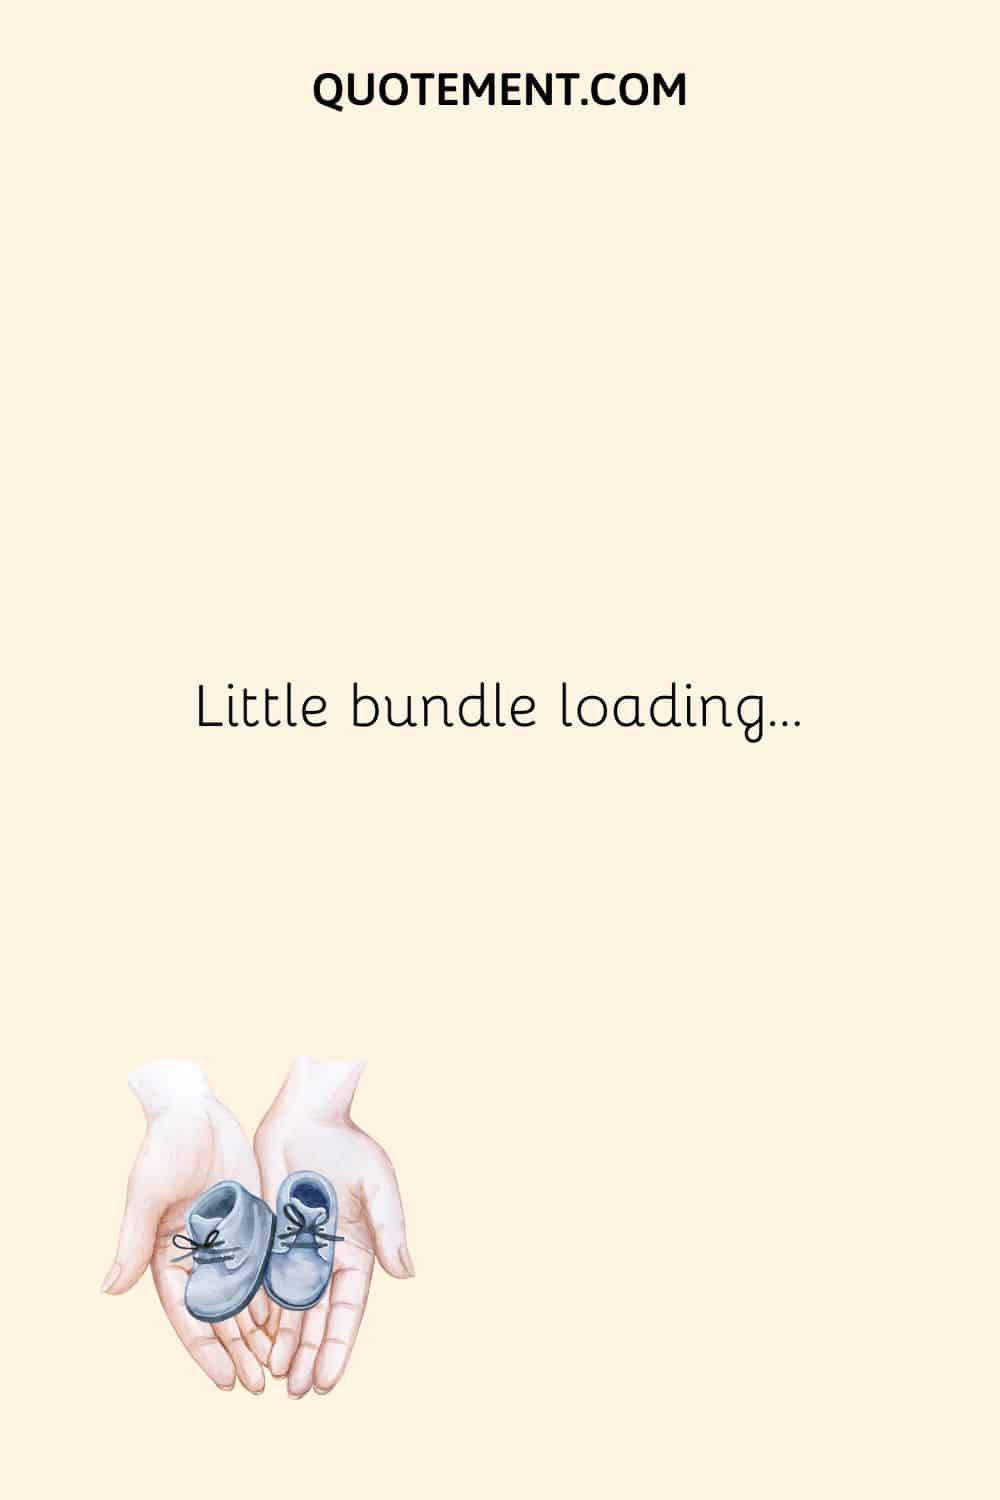 baby shoes in a hand image representing social media cute pregnancy announcement caption